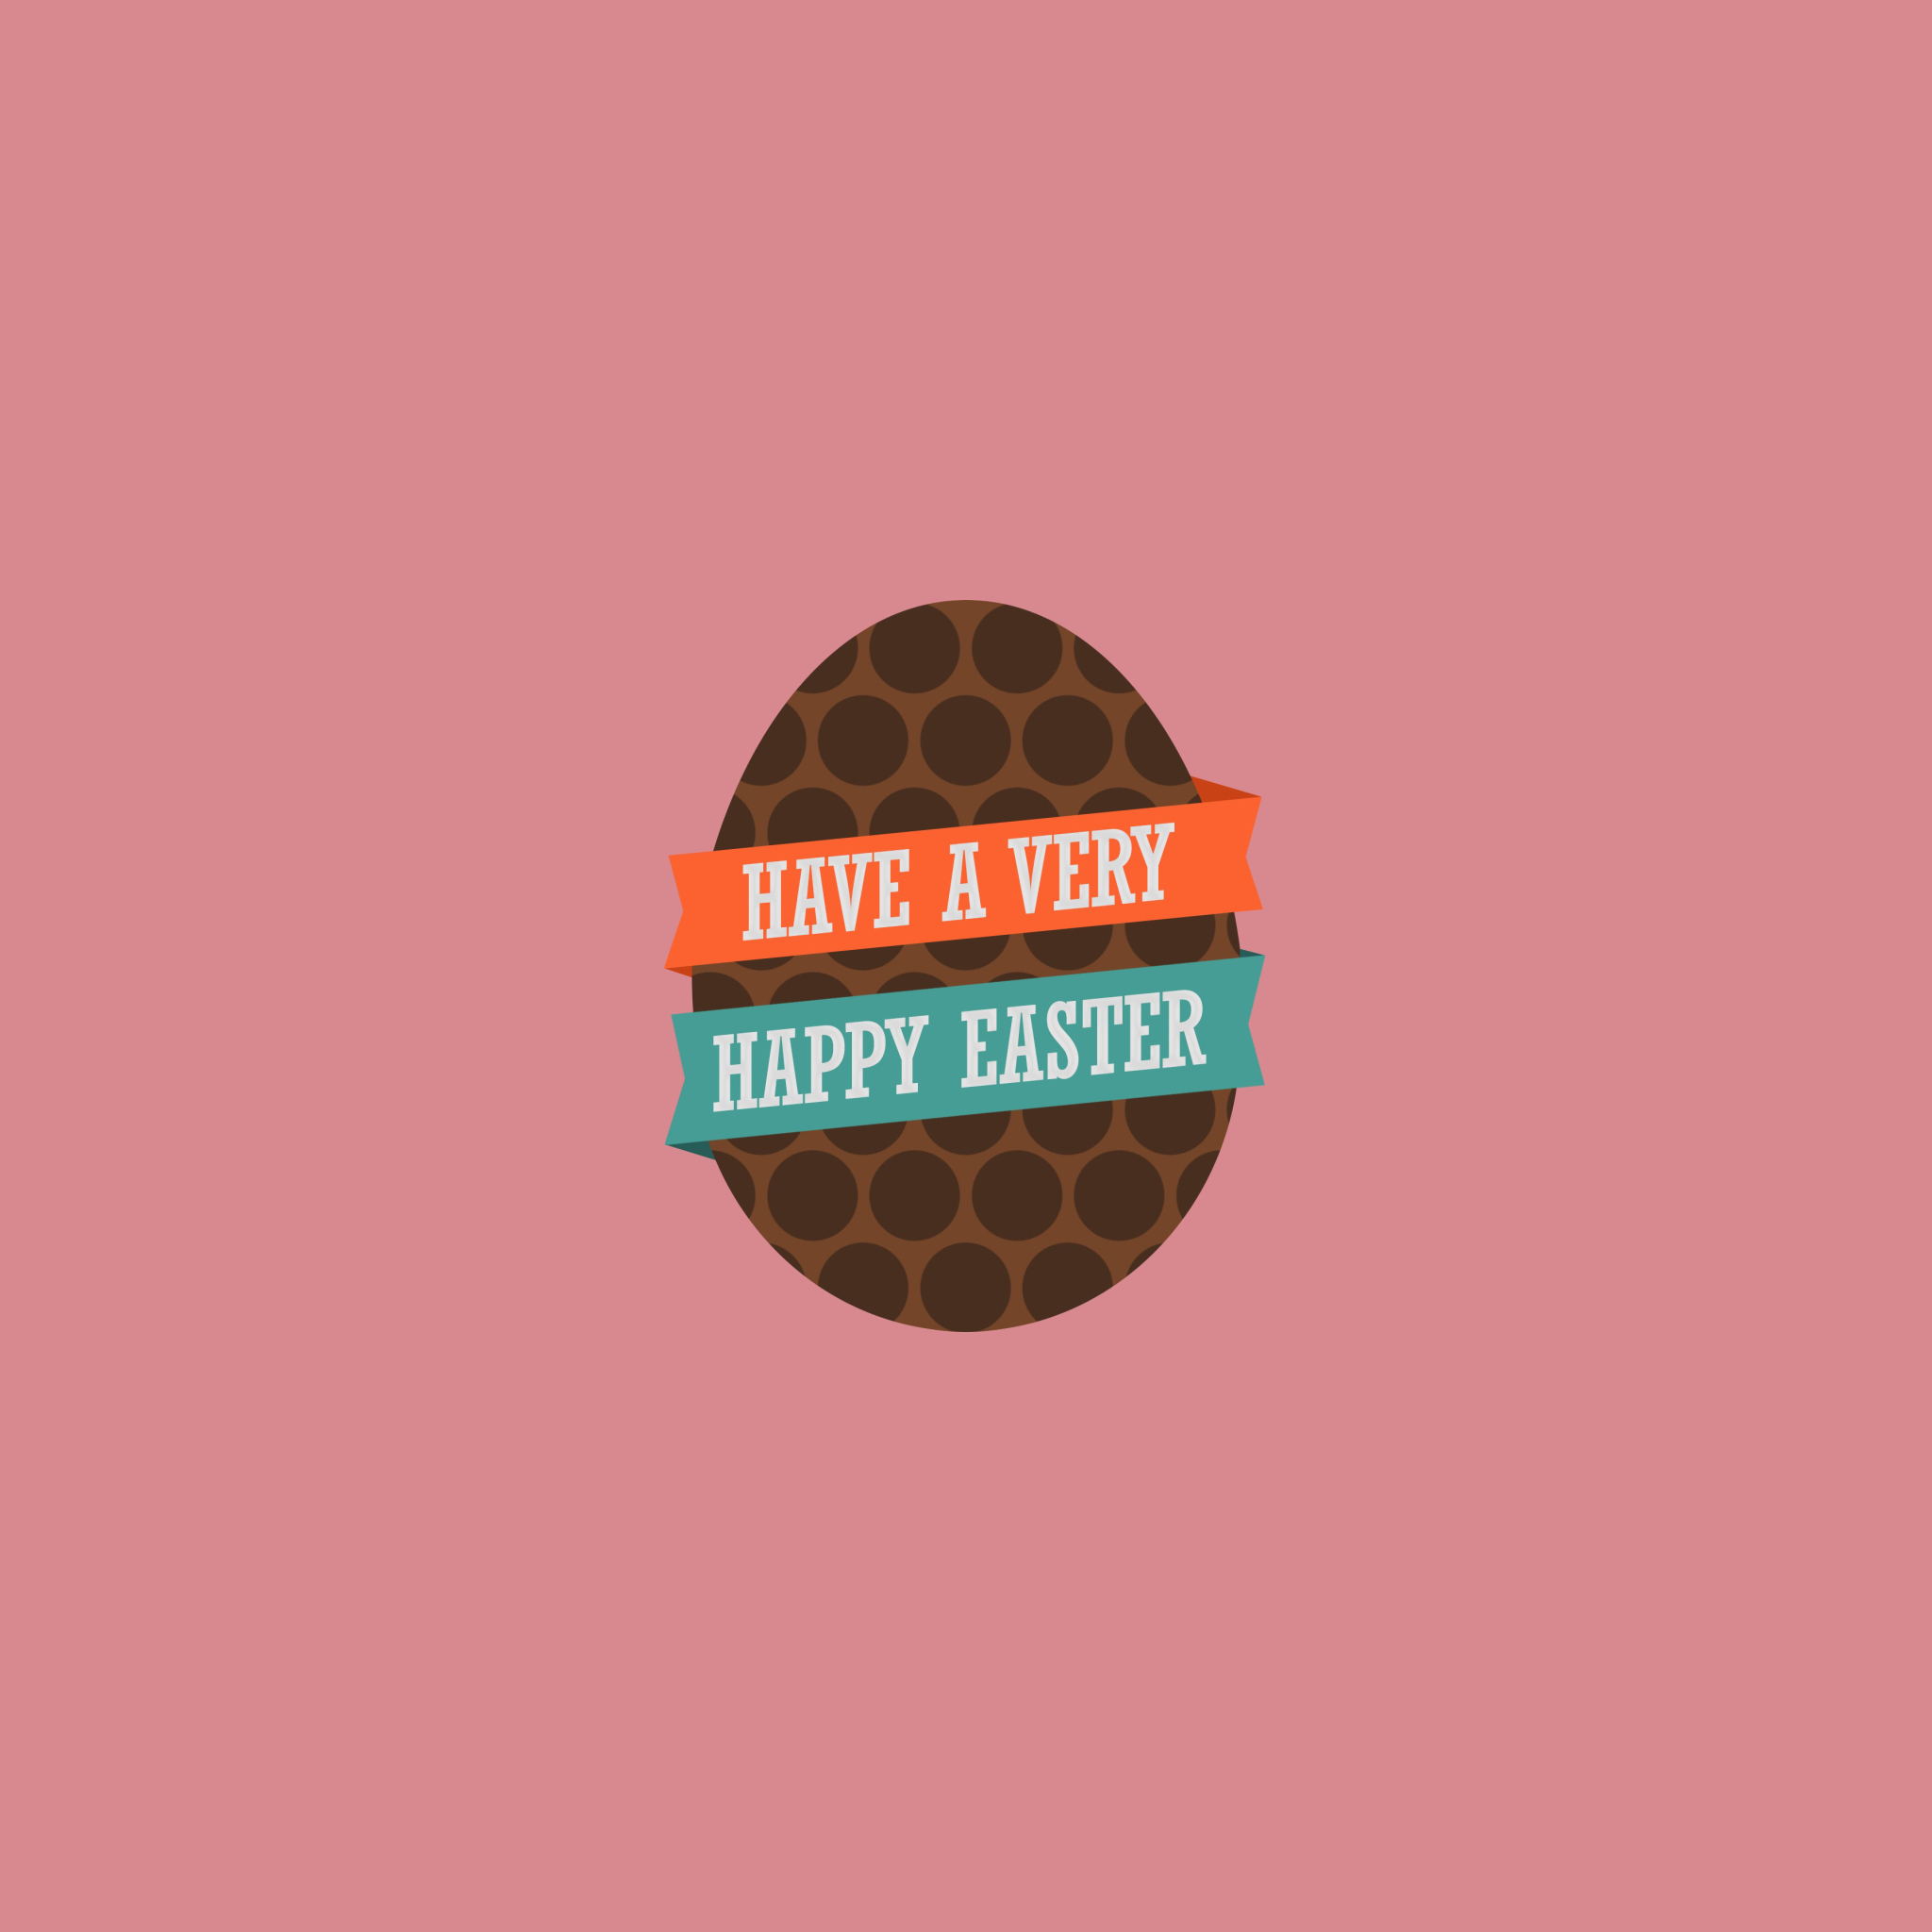 Very Happy Easter Egg wallpaper 2048x2048